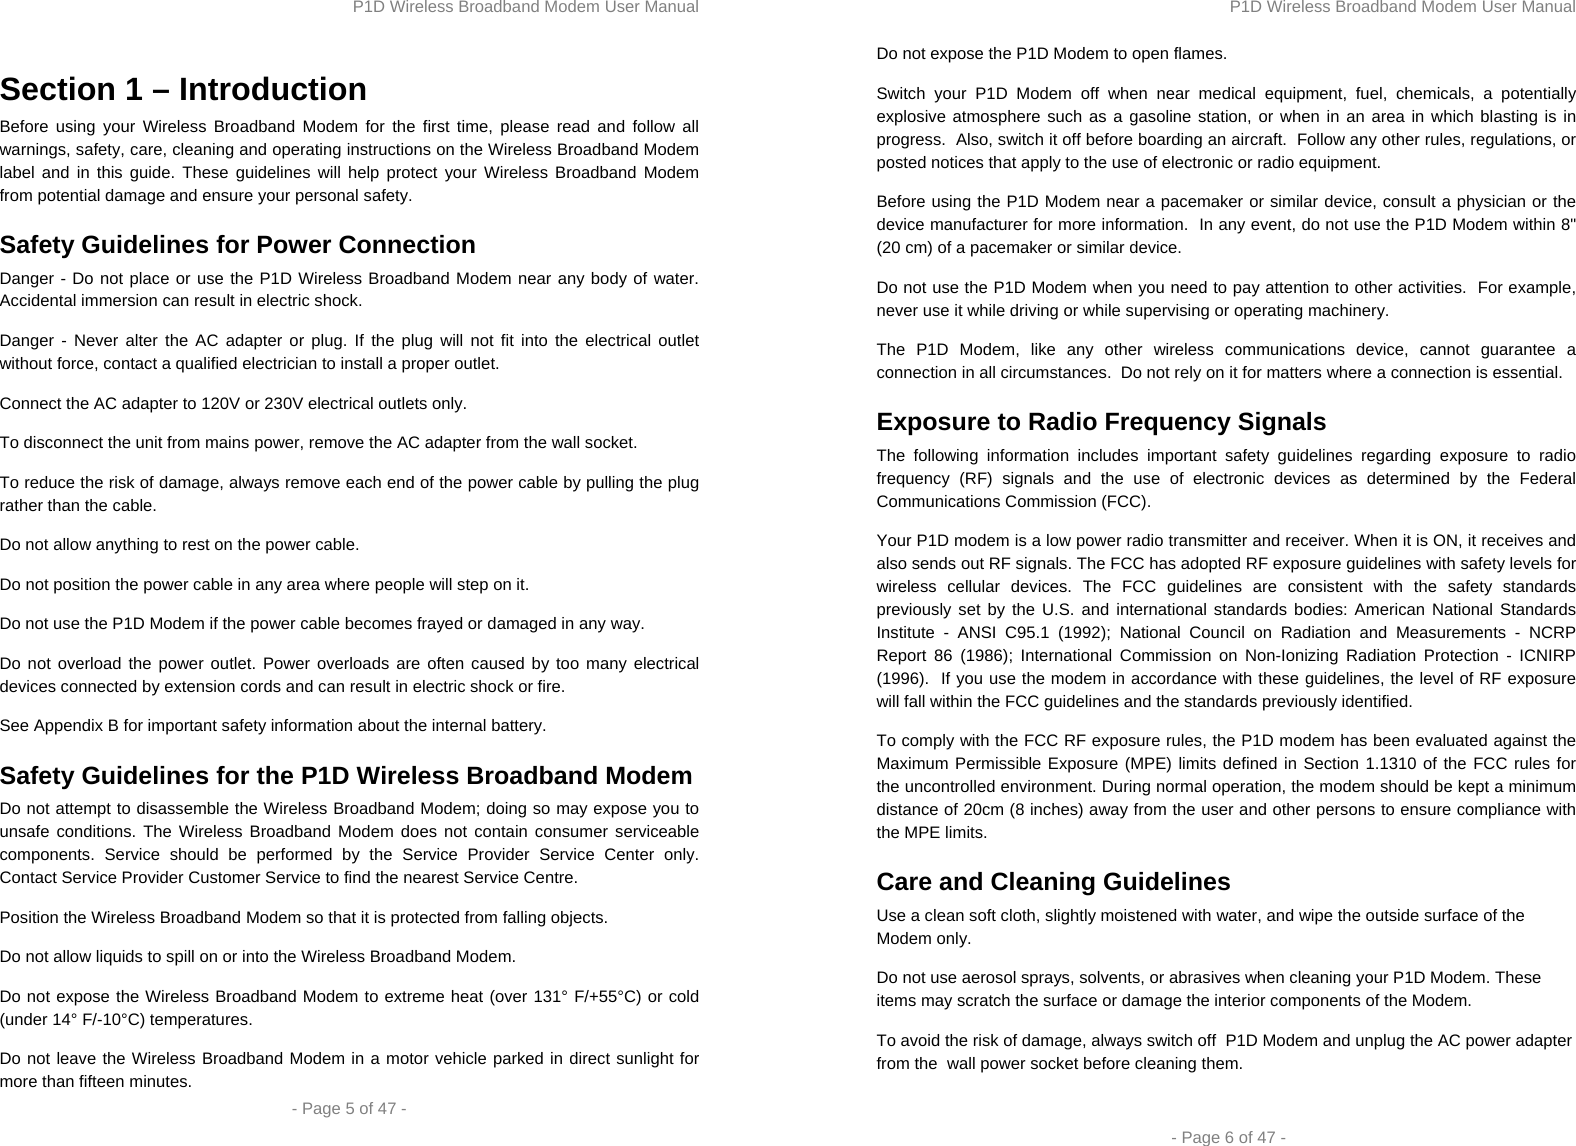 P1D Wireless Broadband Modem User Manual  - Page 5 of 47 -  Section 1 – Introduction Before using your Wireless Broadband Modem for the first time, please read and follow all warnings, safety, care, cleaning and operating instructions on the Wireless Broadband Modem label and in this guide. These guidelines will help protect your Wireless Broadband Modem from potential damage and ensure your personal safety. Safety Guidelines for Power Connection Danger - Do not place or use the P1D Wireless Broadband Modem near any body of water. Accidental immersion can result in electric shock. Danger - Never alter the AC adapter or plug. If the plug will not fit into the electrical outlet without force, contact a qualified electrician to install a proper outlet. Connect the AC adapter to 120V or 230V electrical outlets only. To disconnect the unit from mains power, remove the AC adapter from the wall socket. To reduce the risk of damage, always remove each end of the power cable by pulling the plug rather than the cable. Do not allow anything to rest on the power cable. Do not position the power cable in any area where people will step on it. Do not use the P1D Modem if the power cable becomes frayed or damaged in any way.  Do not overload the power outlet. Power overloads are often caused by too many electrical devices connected by extension cords and can result in electric shock or fire. See Appendix B for important safety information about the internal battery. Safety Guidelines for the P1D Wireless Broadband Modem  Do not attempt to disassemble the Wireless Broadband Modem; doing so may expose you to unsafe conditions. The Wireless Broadband Modem does not contain consumer serviceable components. Service should be performed by the Service Provider Service Center only. Contact Service Provider Customer Service to find the nearest Service Centre. Position the Wireless Broadband Modem so that it is protected from falling objects. Do not allow liquids to spill on or into the Wireless Broadband Modem. Do not expose the Wireless Broadband Modem to extreme heat (over 131° F/+55°C) or cold (under 14° F/-10°C) temperatures. Do not leave the Wireless Broadband Modem in a motor vehicle parked in direct sunlight for more than fifteen minutes. P1D Wireless Broadband Modem User Manual  - Page 6 of 47 - Do not expose the P1D Modem to open flames. Switch your P1D Modem off when near medical equipment, fuel, chemicals, a potentially explosive atmosphere such as a gasoline station, or when in an area in which blasting is in progress.  Also, switch it off before boarding an aircraft.  Follow any other rules, regulations, or posted notices that apply to the use of electronic or radio equipment. Before using the P1D Modem near a pacemaker or similar device, consult a physician or the device manufacturer for more information.  In any event, do not use the P1D Modem within 8&quot; (20 cm) of a pacemaker or similar device.  Do not use the P1D Modem when you need to pay attention to other activities.  For example, never use it while driving or while supervising or operating machinery.  The P1D Modem, like any other wireless communications device, cannot guarantee a connection in all circumstances.  Do not rely on it for matters where a connection is essential. Exposure to Radio Frequency Signals The following information includes important safety guidelines regarding exposure to radio frequency (RF) signals and the use of electronic devices as determined by the Federal Communications Commission (FCC).  Your P1D modem is a low power radio transmitter and receiver. When it is ON, it receives and also sends out RF signals. The FCC has adopted RF exposure guidelines with safety levels for wireless cellular devices. The FCC guidelines are consistent with the safety standards previously set by the U.S. and international standards bodies: American National Standards Institute - ANSI C95.1 (1992); National Council on Radiation and Measurements - NCRP Report 86 (1986); International Commission on Non-Ionizing Radiation Protection - ICNIRP (1996).  If you use the modem in accordance with these guidelines, the level of RF exposure will fall within the FCC guidelines and the standards previously identified. To comply with the FCC RF exposure rules, the P1D modem has been evaluated against the Maximum Permissible Exposure (MPE) limits defined in Section 1.1310 of the FCC rules for the uncontrolled environment. During normal operation, the modem should be kept a minimum distance of 20cm (8 inches) away from the user and other persons to ensure compliance with the MPE limits. Care and Cleaning Guidelines Use a clean soft cloth, slightly moistened with water, and wipe the outside surface of the Modem only. Do not use aerosol sprays, solvents, or abrasives when cleaning your P1D Modem. These items may scratch the surface or damage the interior components of the Modem. To avoid the risk of damage, always switch off  P1D Modem and unplug the AC power adapter from the  wall power socket before cleaning them.  